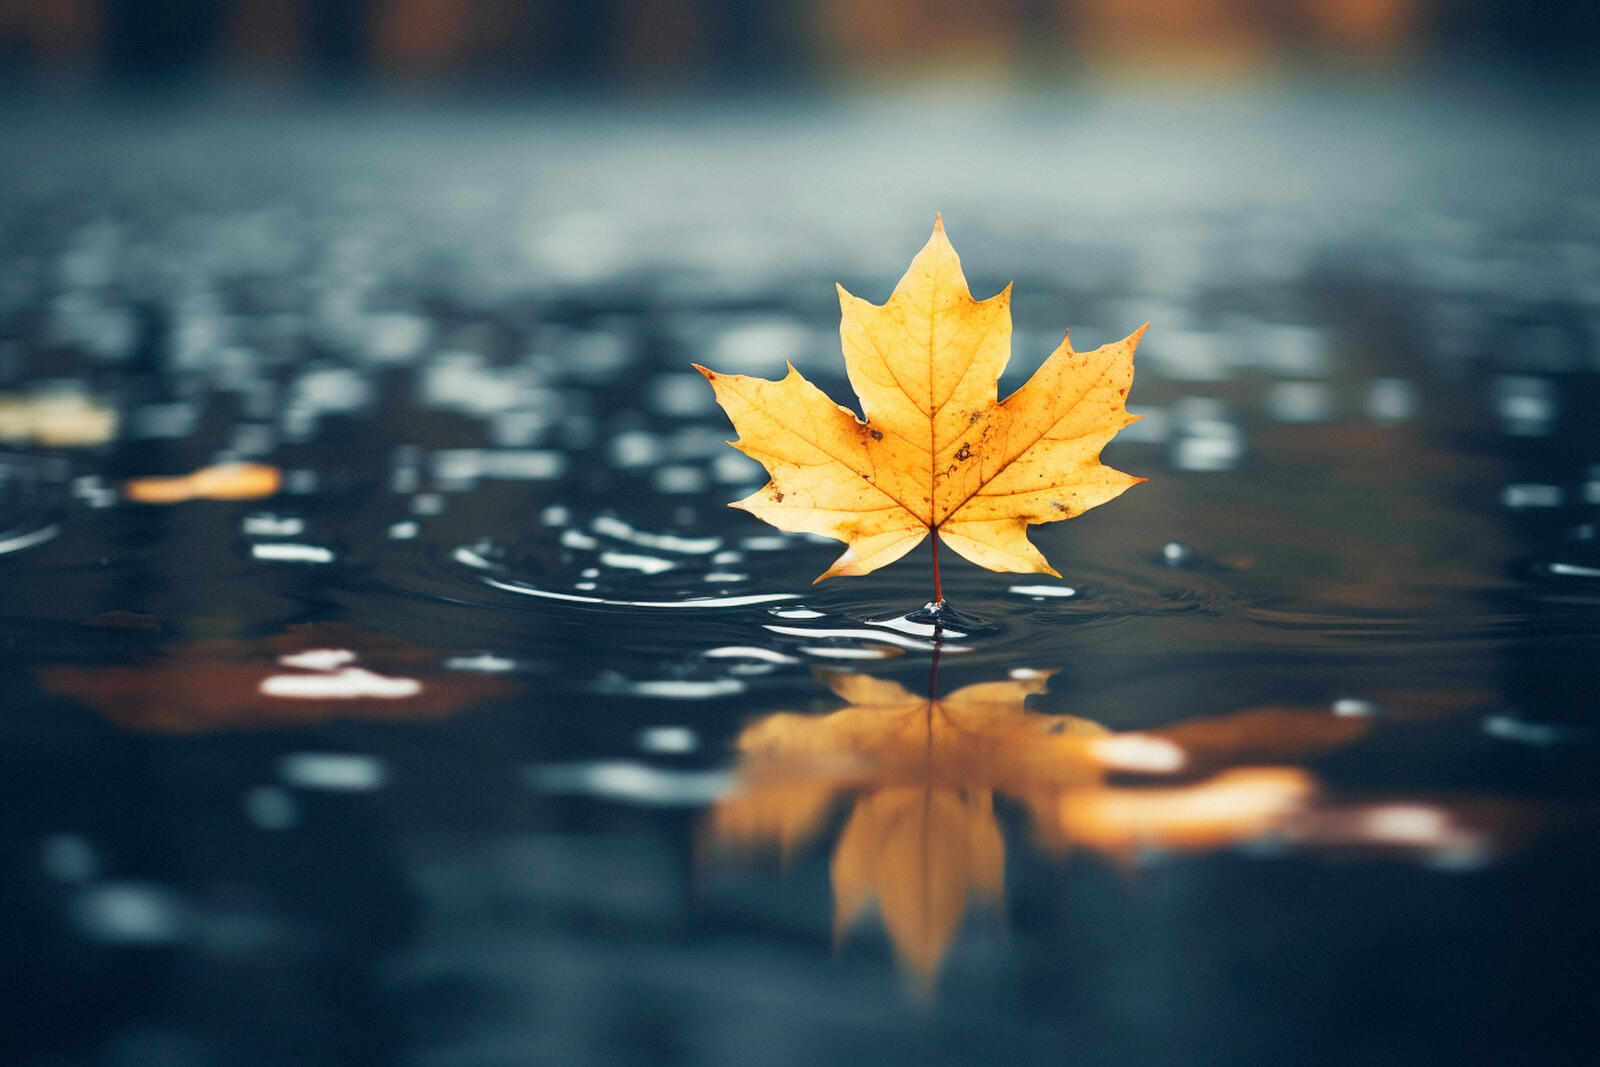 Free photo An autumn wedge leaf floats on the water